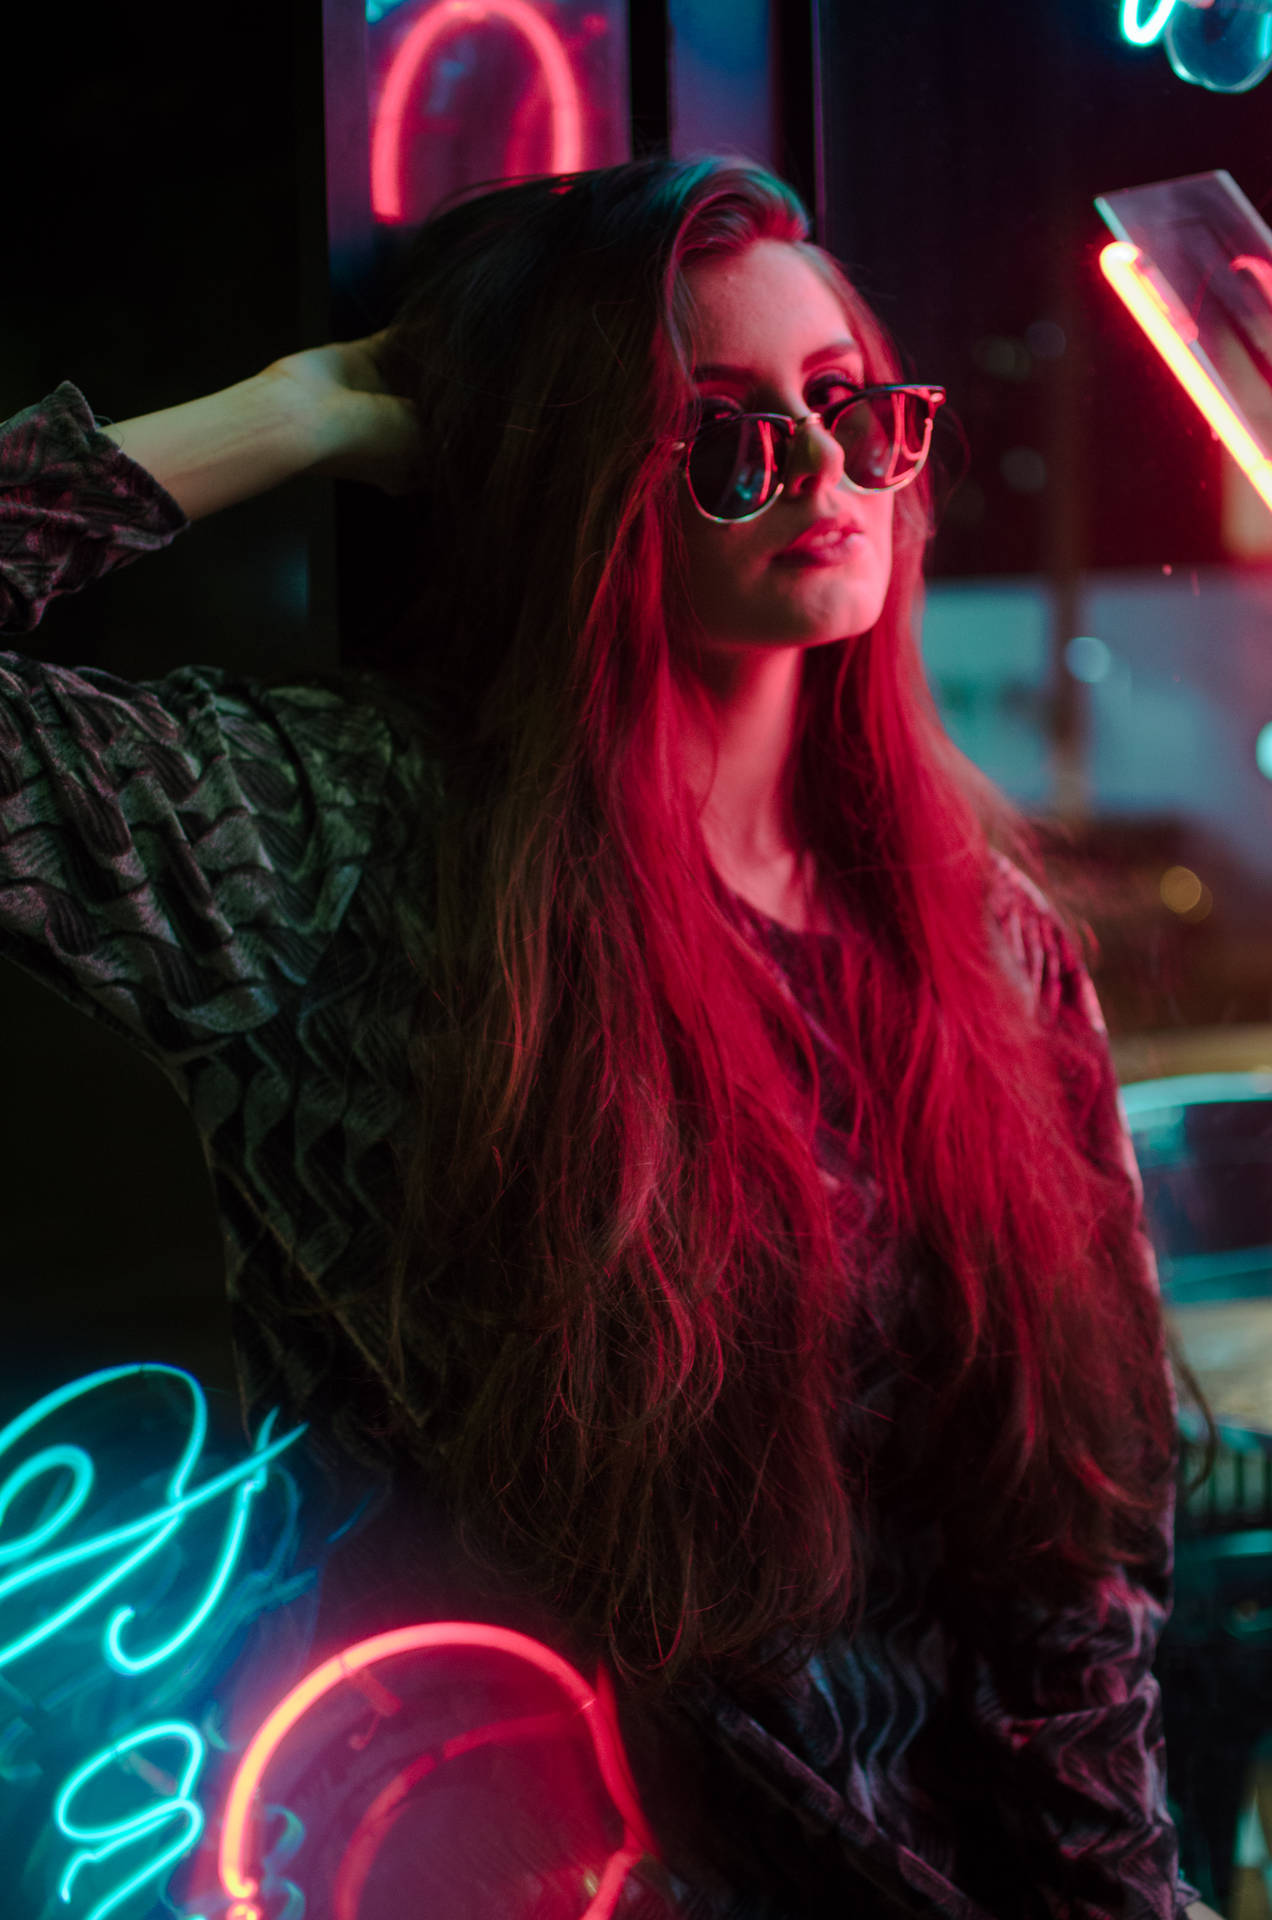 Cool Girl In Neon Room Background